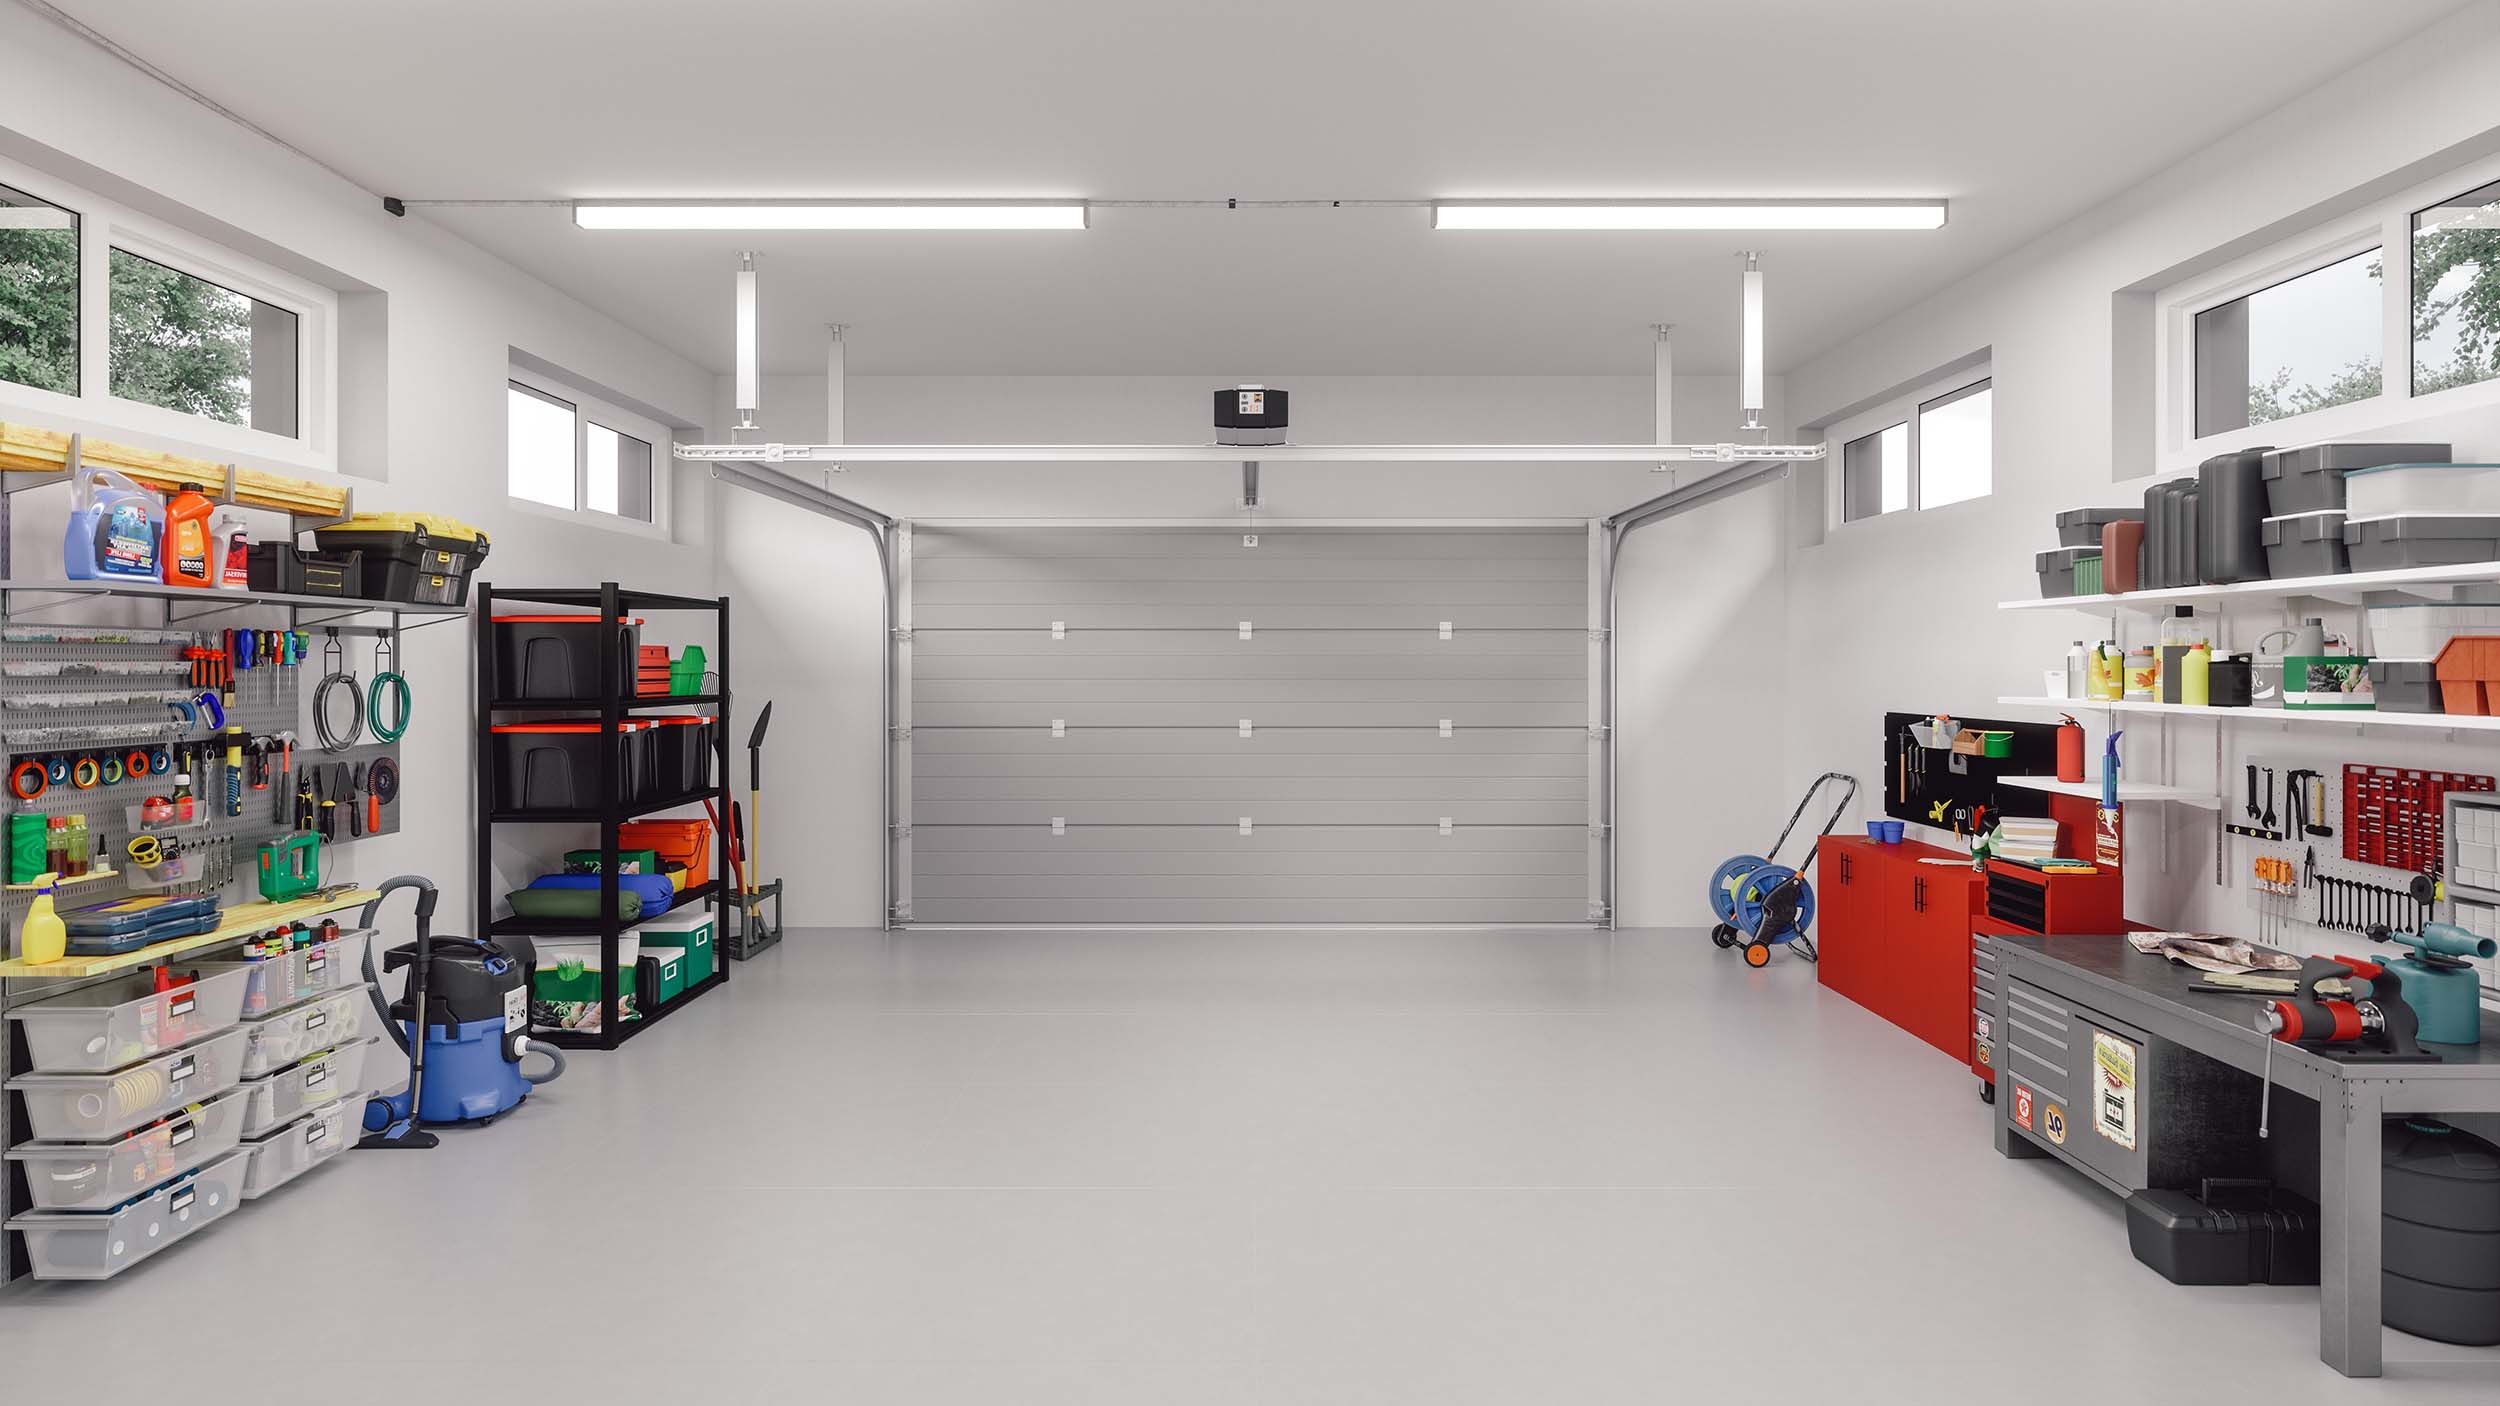 From tool organization to totes and sports equipment storage, we